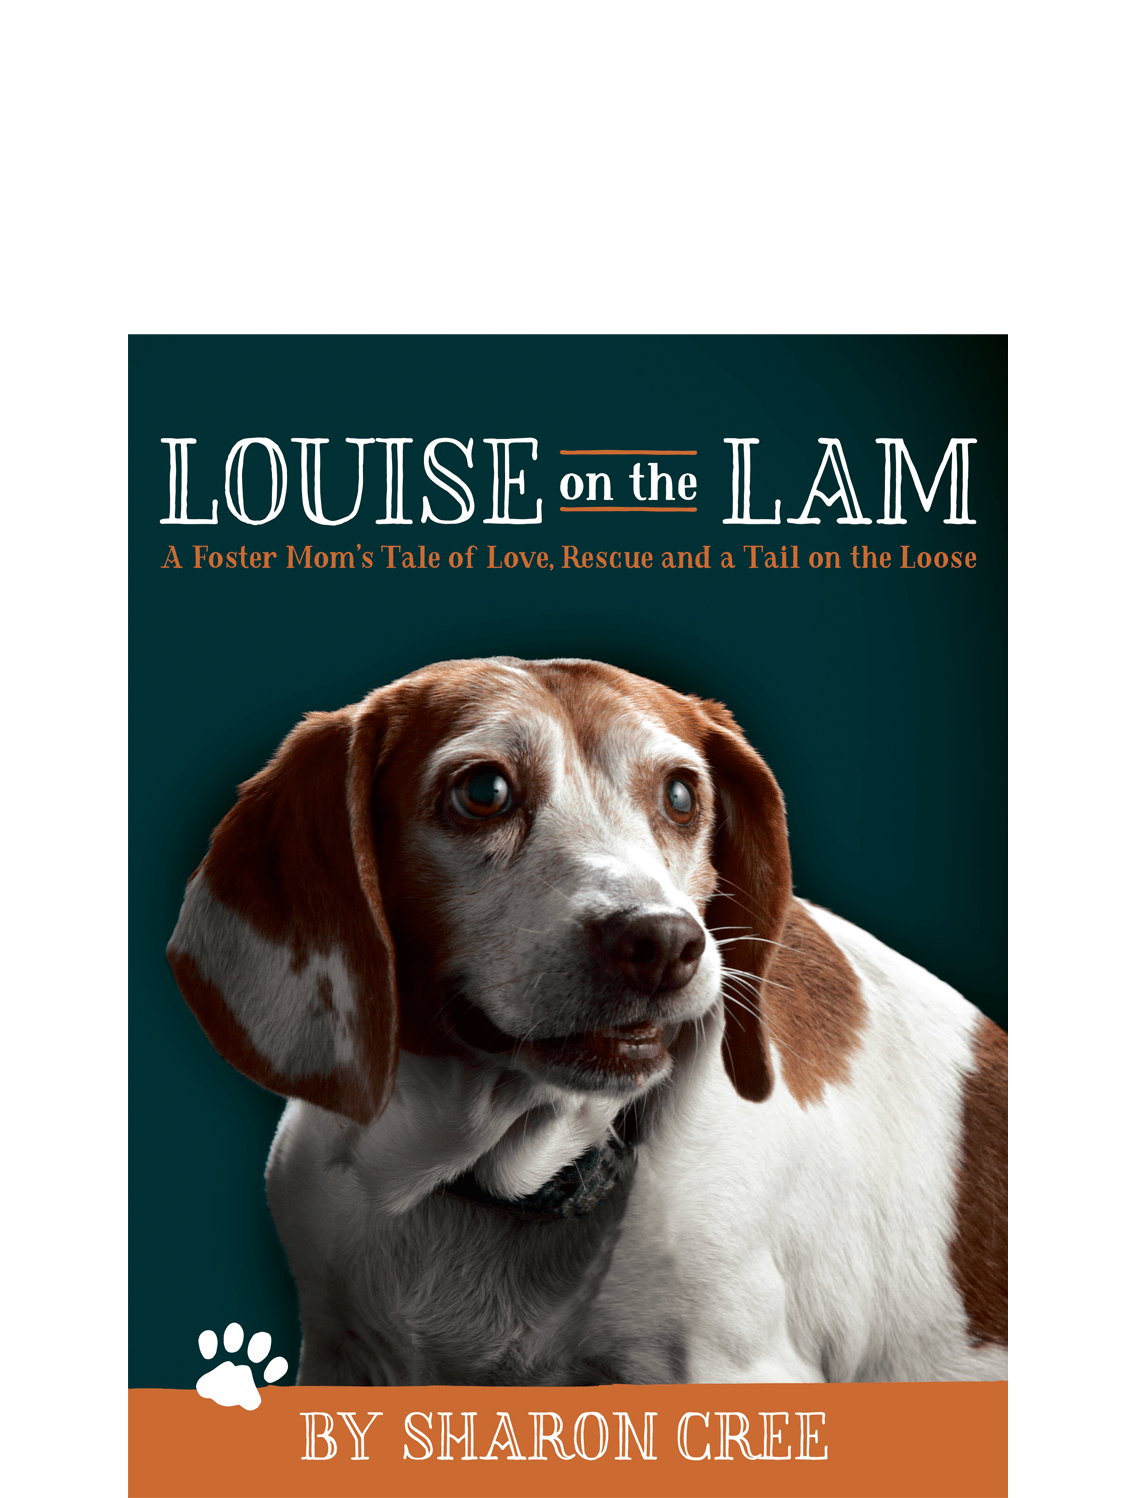 Louise on the Lam, <em>A Foster Mom’s Tale of Love, Rescue and a Tail on the Loose</em>